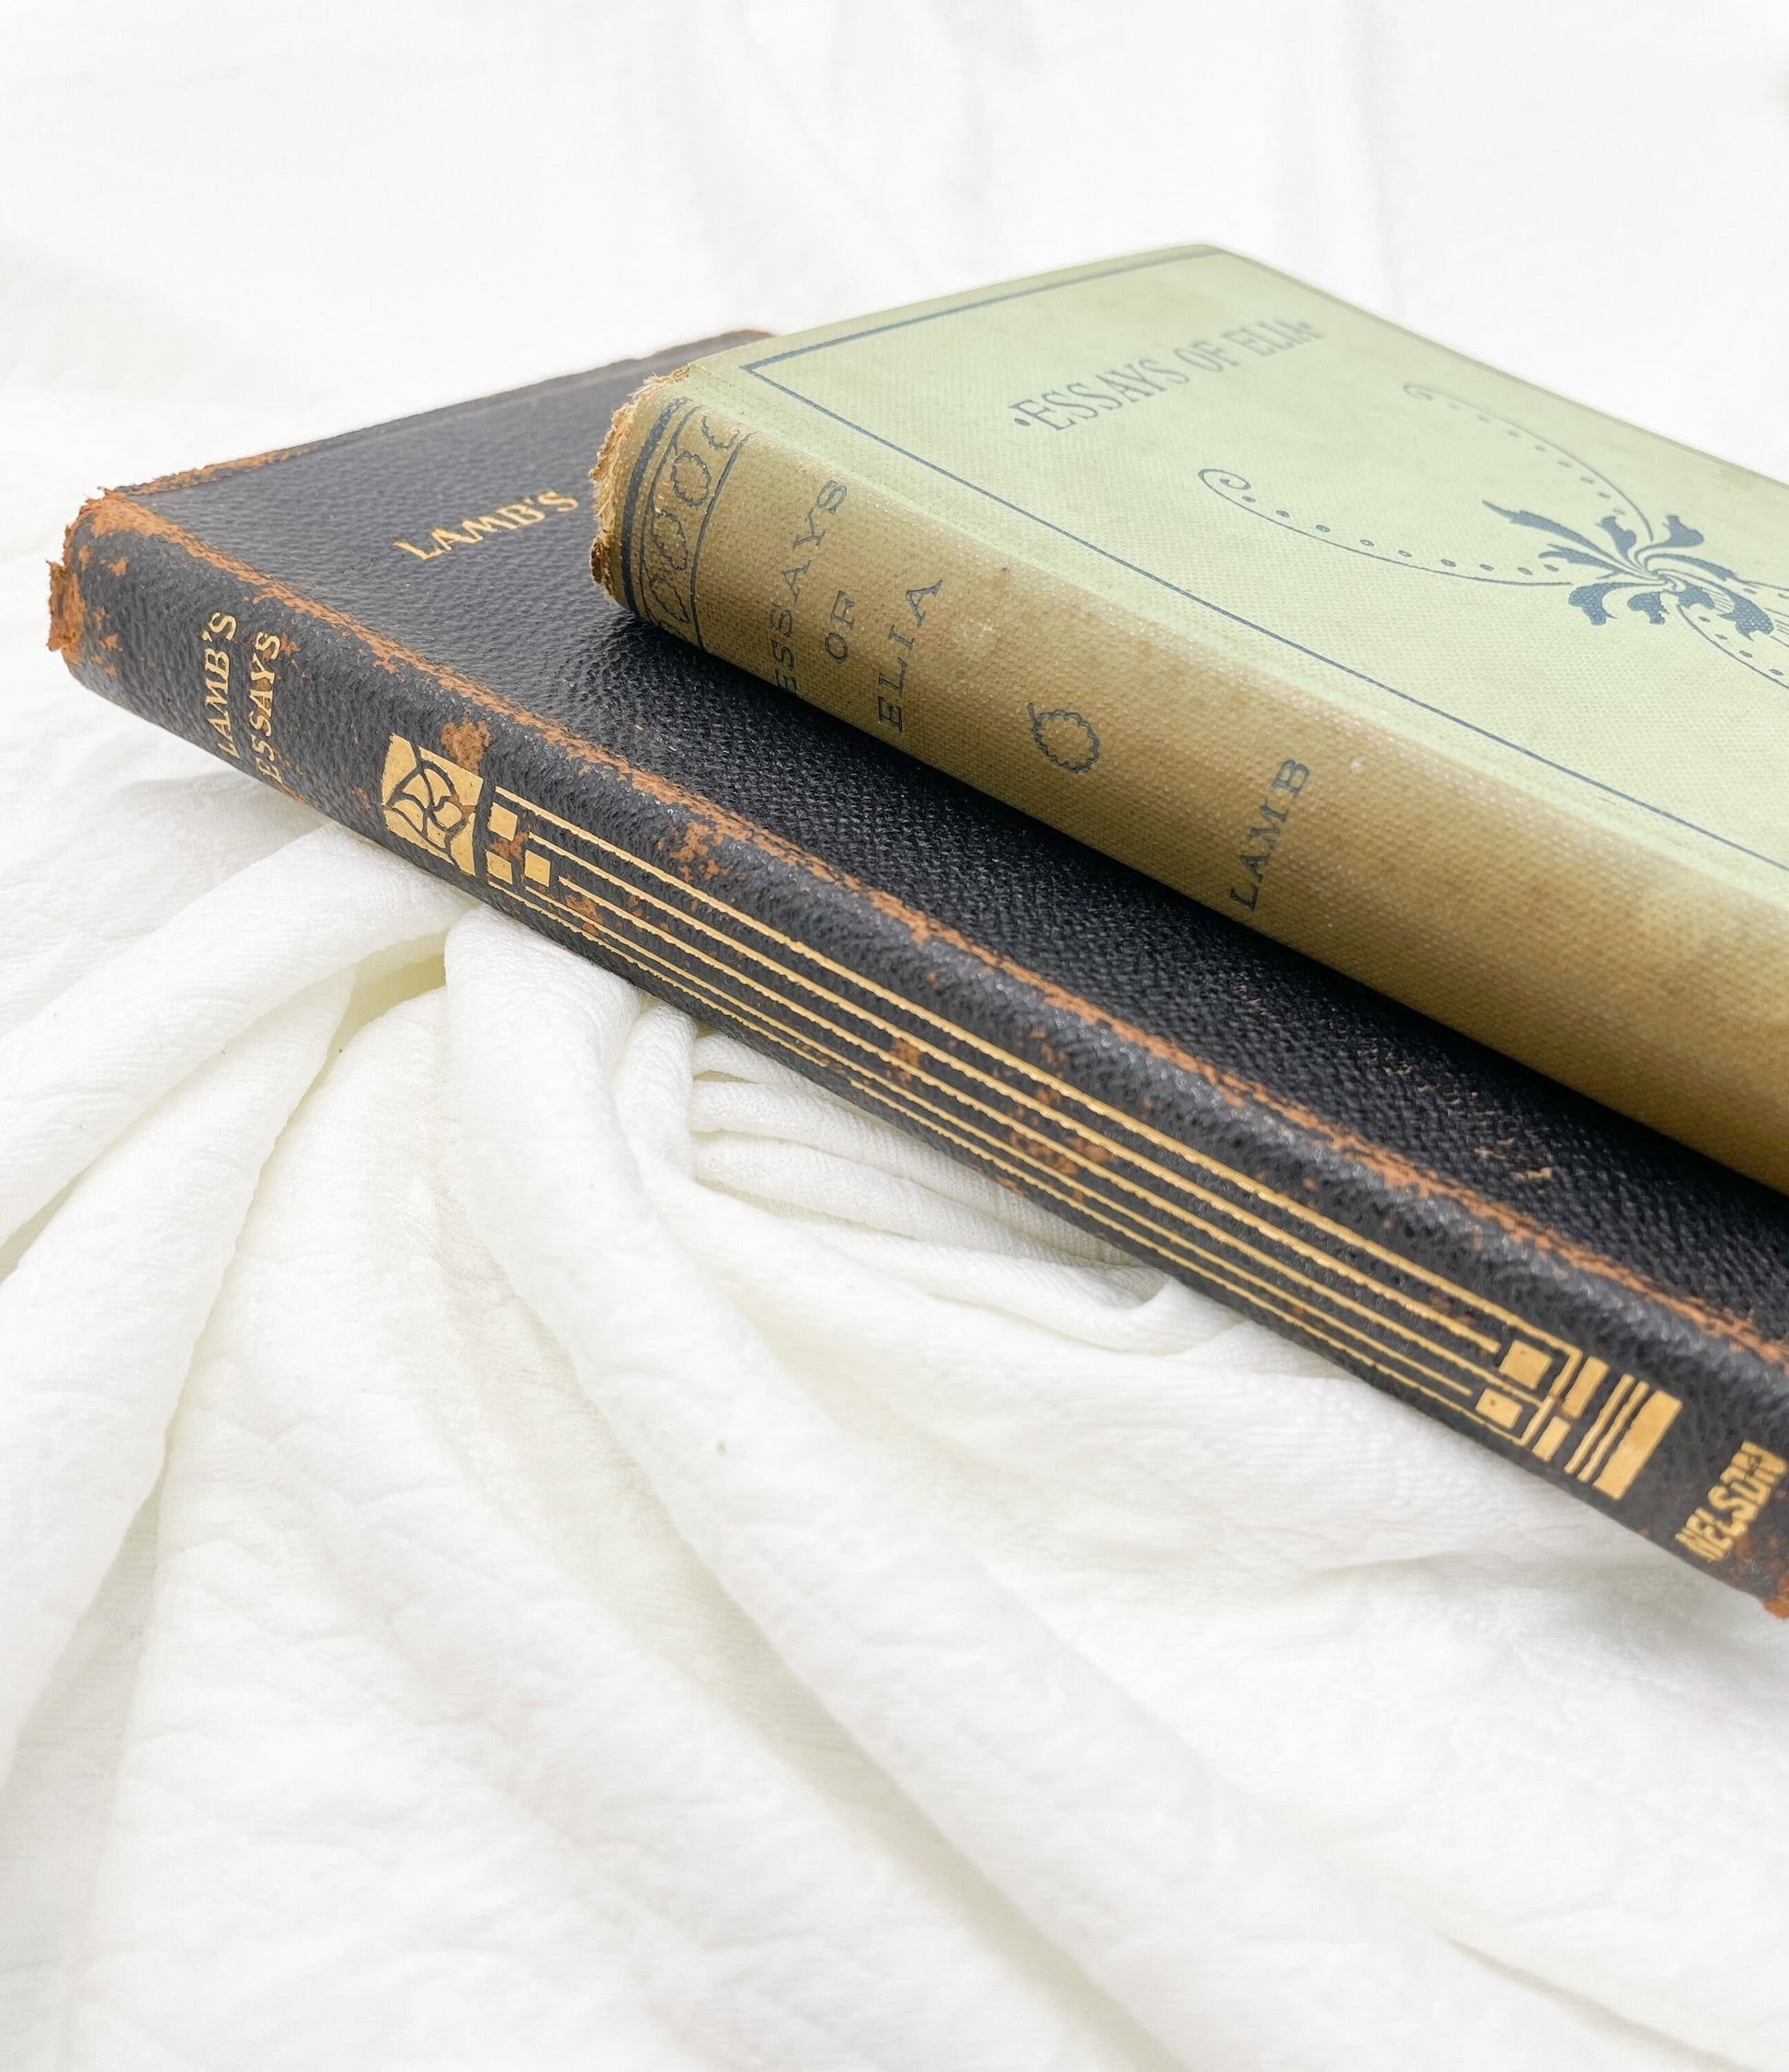 Set of 2 Vintage Books, The Lamb's Essays and The Essays of Elia by Charles Lamb